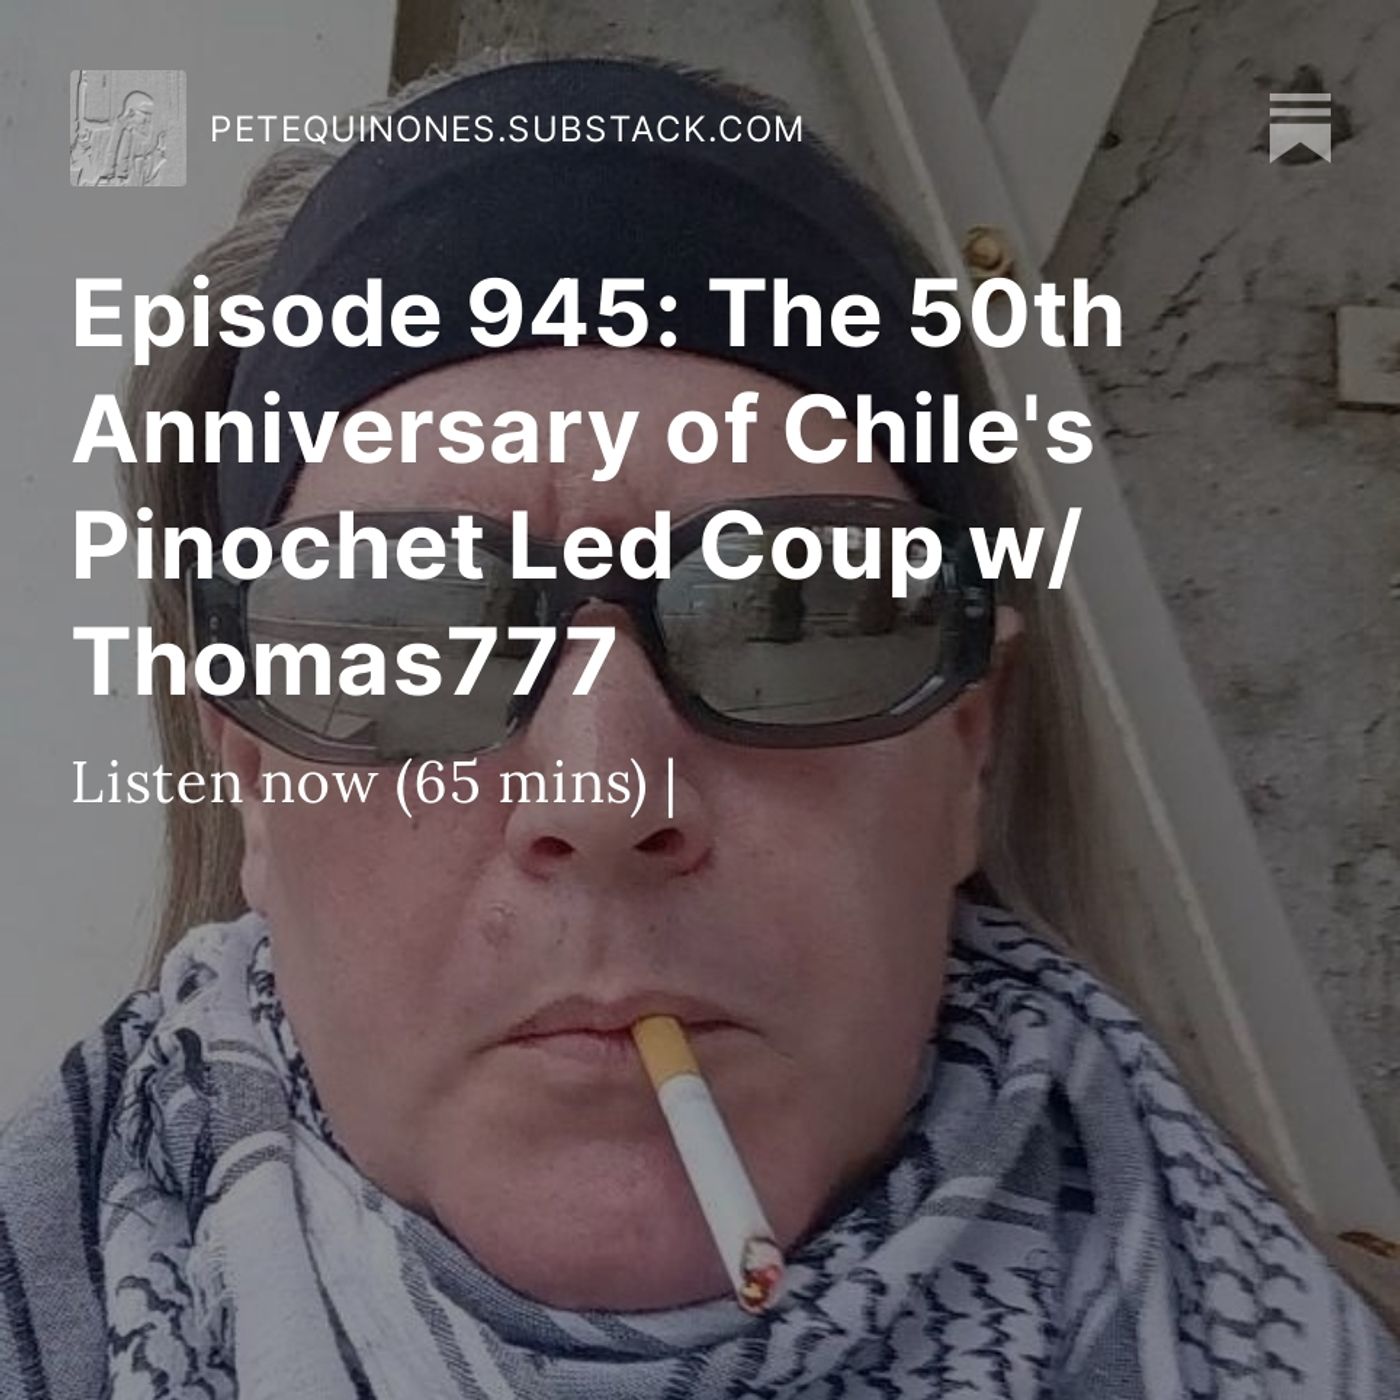 Episode 945: The 50th Anniversary of Chile's Pinochet Led Coup w/ Thomas777